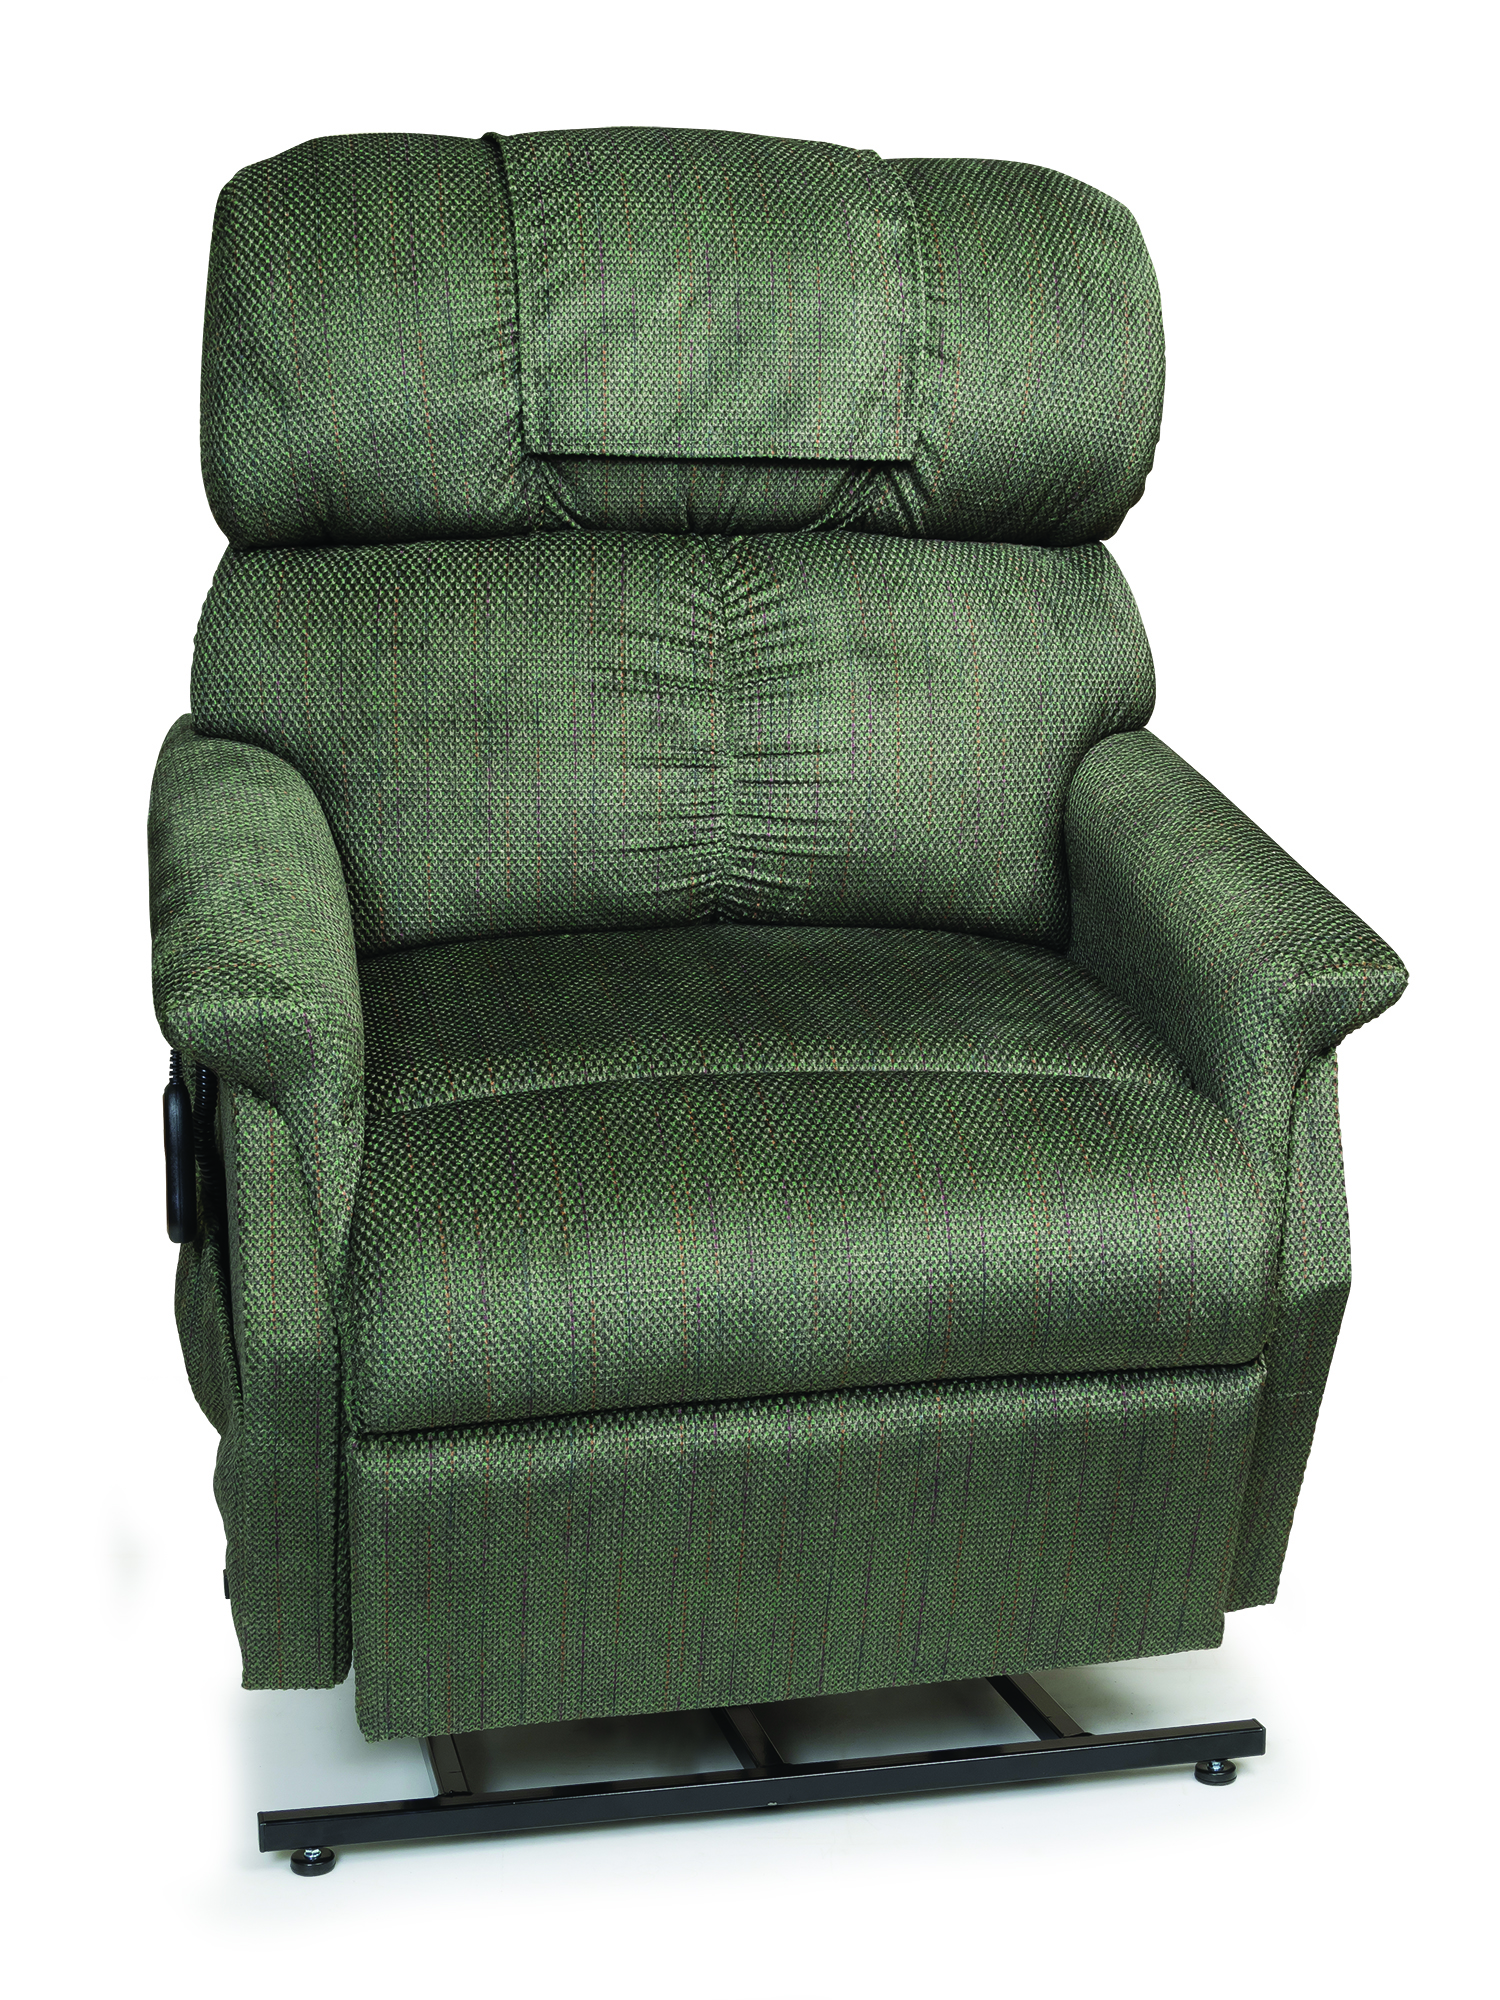 Photo of Golden Technologies Comforter Lift Chair, Size Wide Large